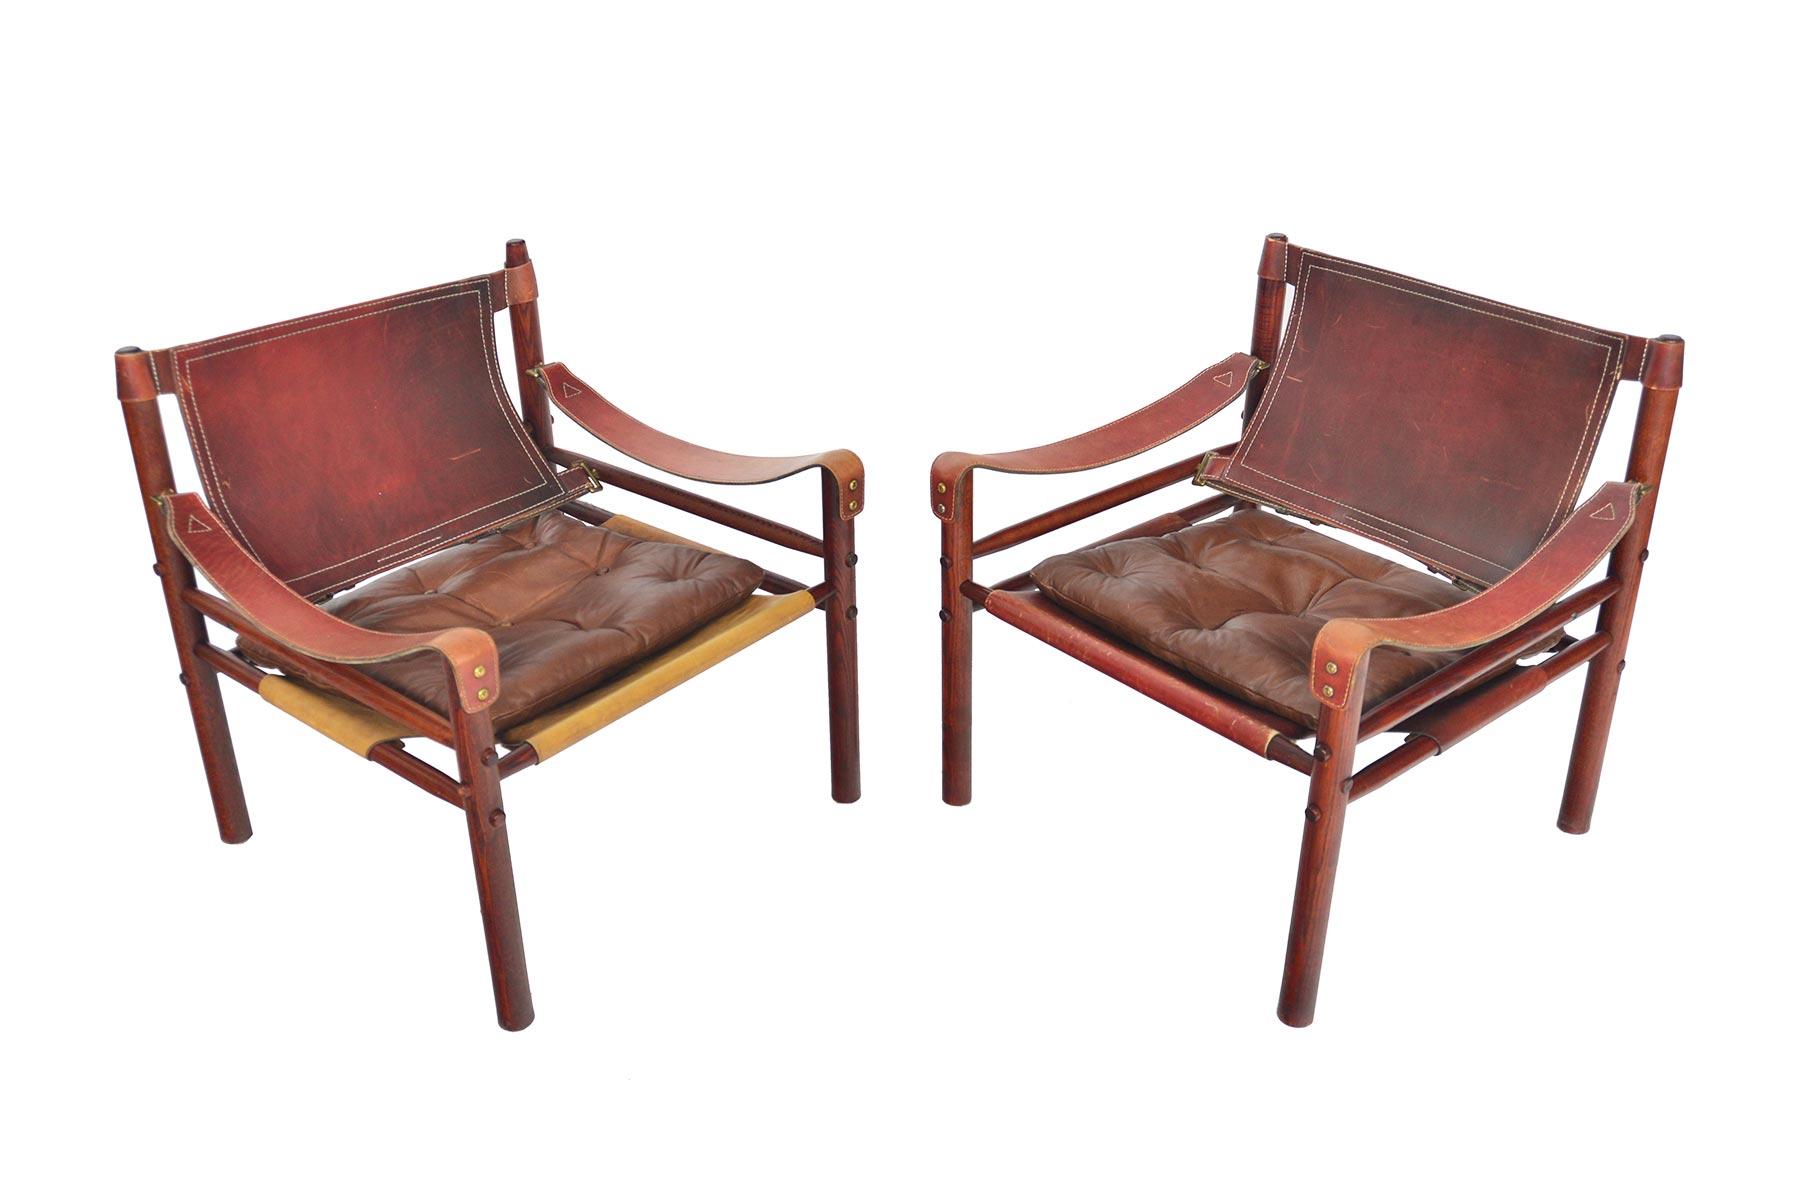 This gorgeous pair of midcentury Sirocco chairs was designed by Arne Norell in 1964. The exposed stained oak frame is constructed without any glue or screws and uses the support of slung leather. The beautiful original rust leather is perfectly